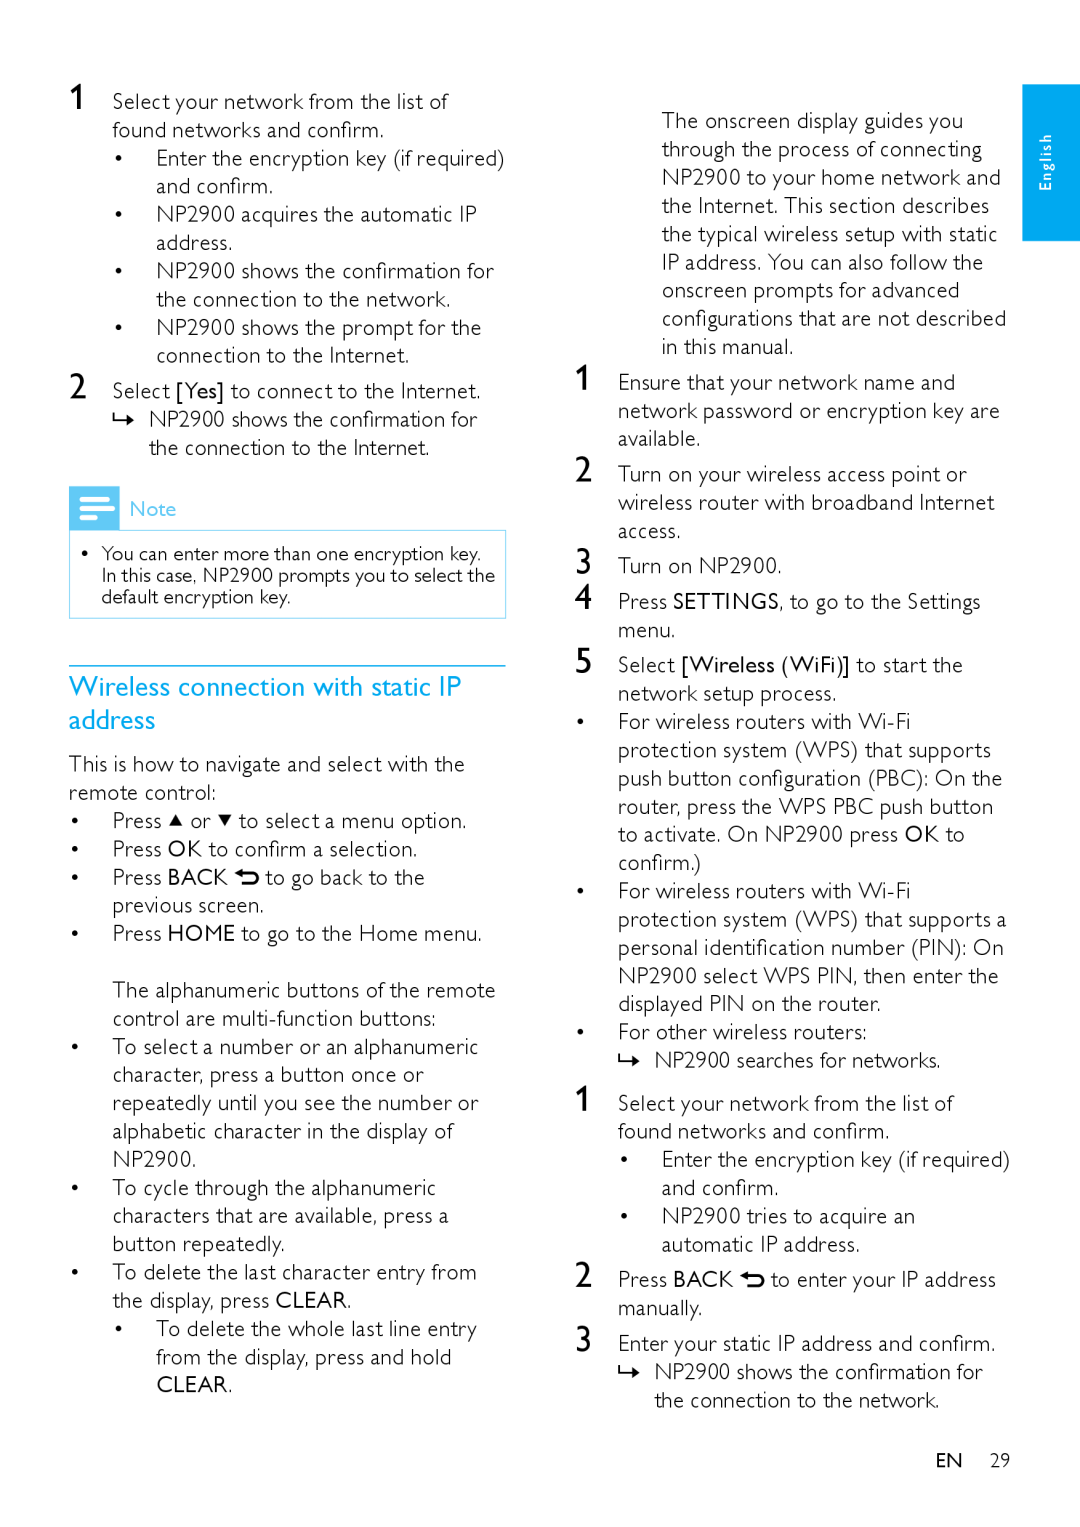 Philips NP2900 user manual Wireless connection with static IP address 